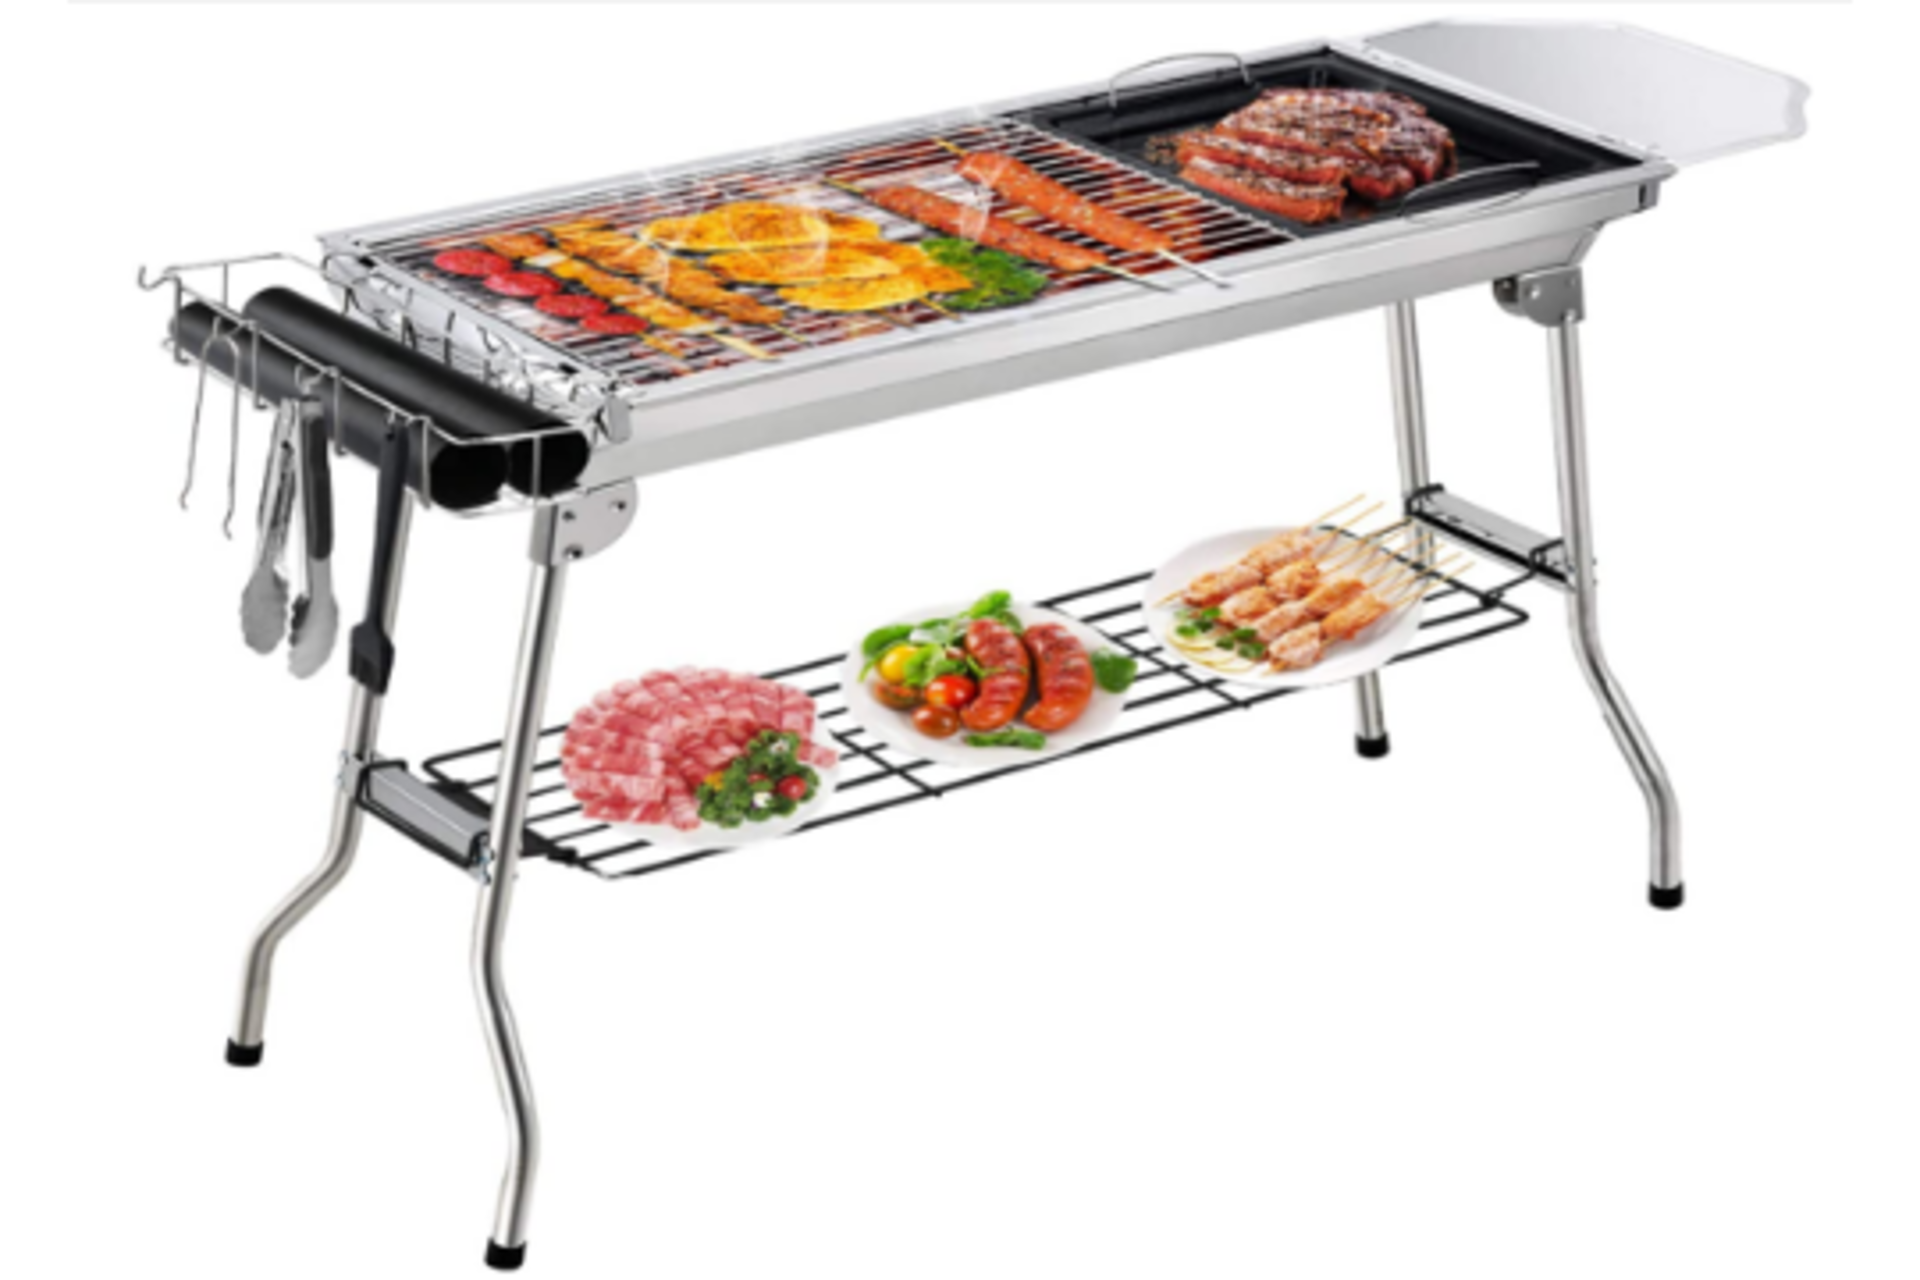 8 X BRAND NEW LARGE BBQ GRILL WITH UNDER STORAGE SHELF RRP £220